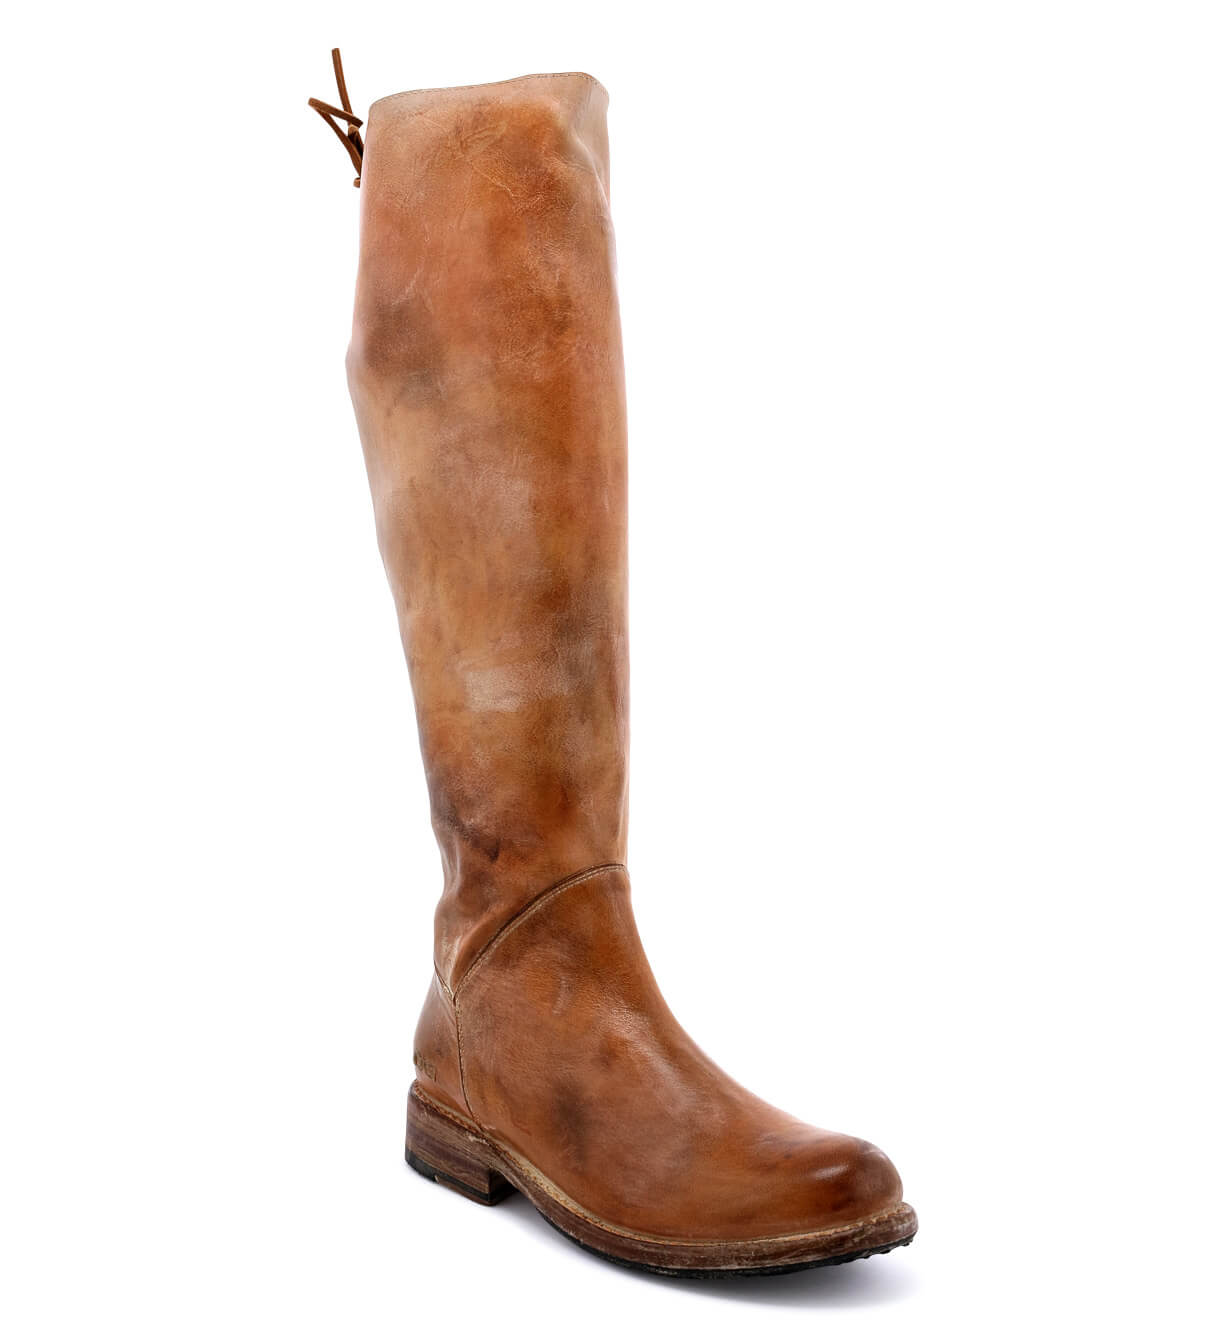 A women's Manchester leather boot by Bed Stu on a white background.